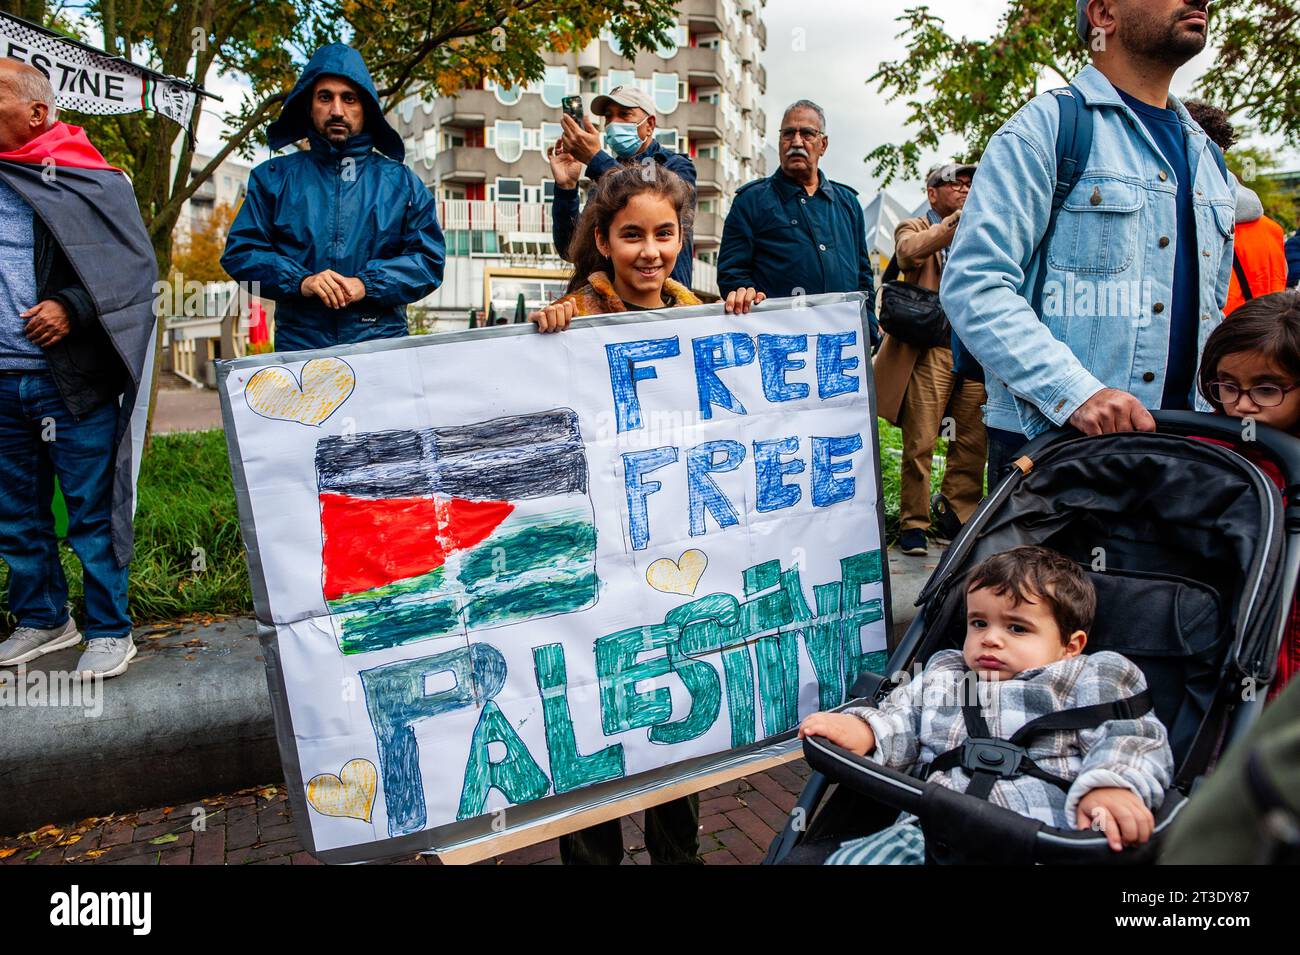 October 22nd, Rotterdam. Palestinians and their supporters keep protesting to condemn the government of Israel and express solidarity with the Palestinian people. Around 5,000 protesters gathered in grief, fury, and solidarity because of the recent escalation of the Israeli-Palestinian conflict and the disturbing events in Gaza. Stock Photo